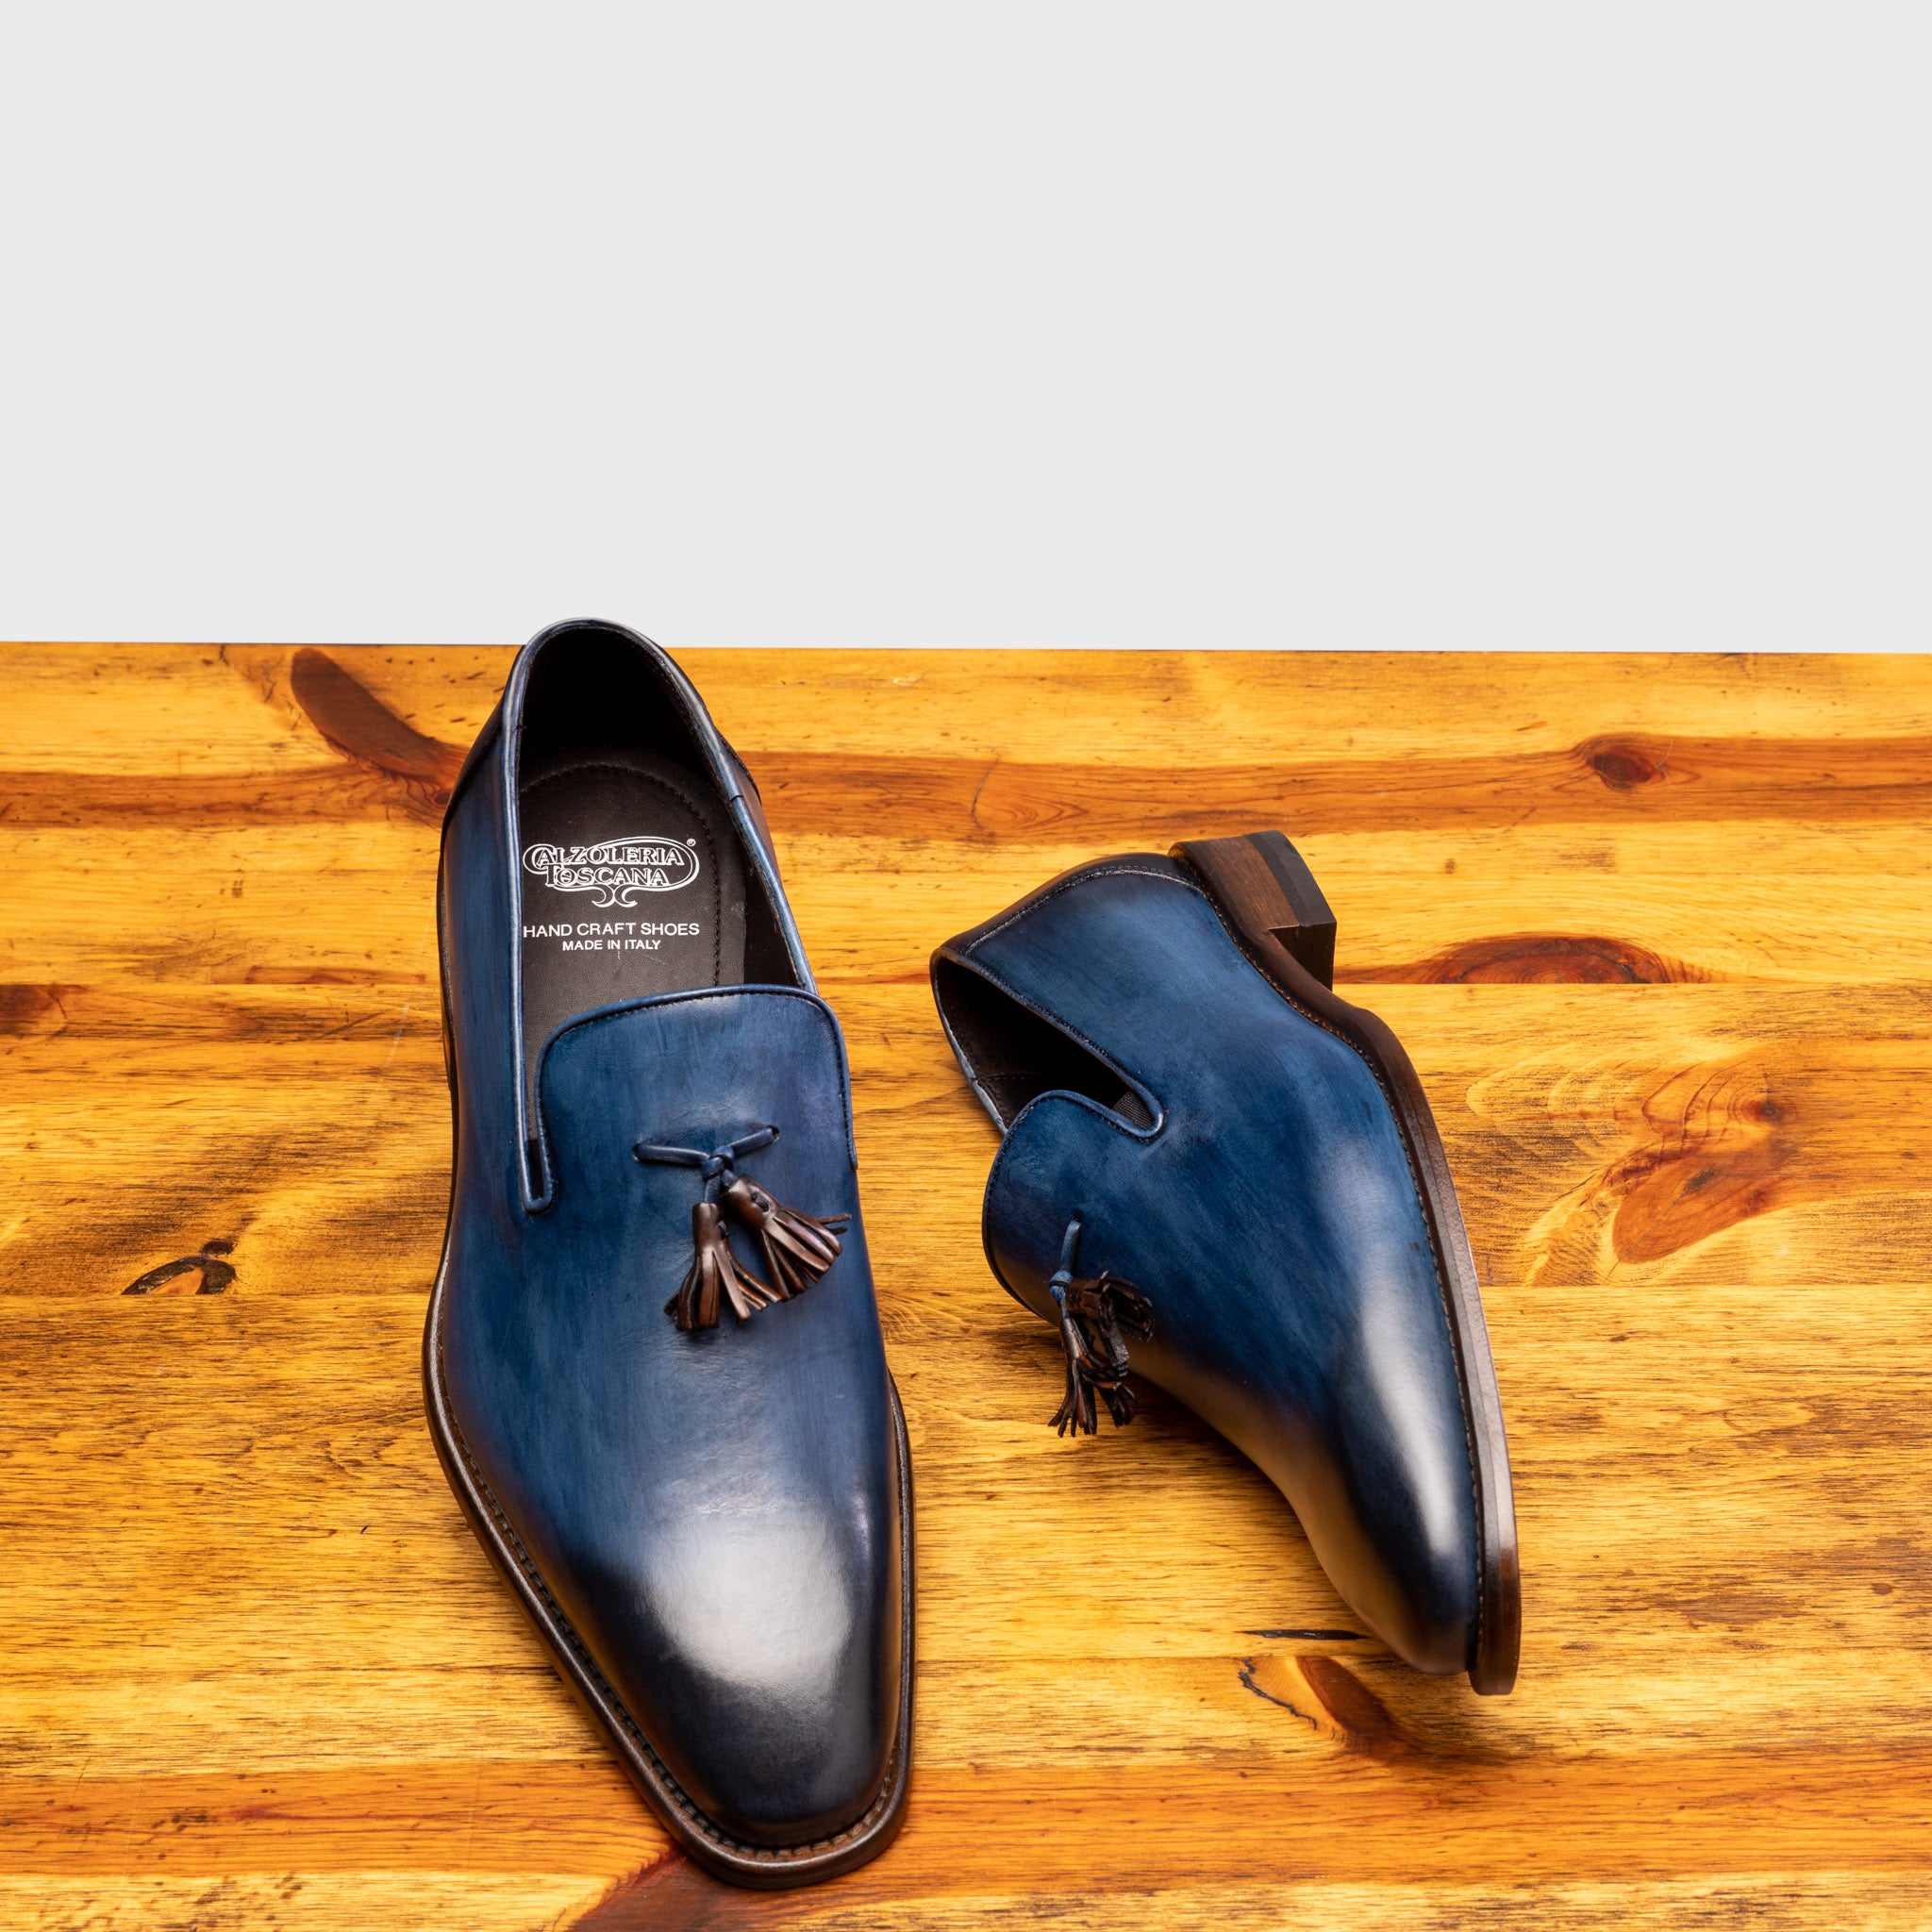 Pair of Z993 Calzoleria Toscana Ocean Blue David Tassel Slip-On showing the brand name label on top of a wooden table